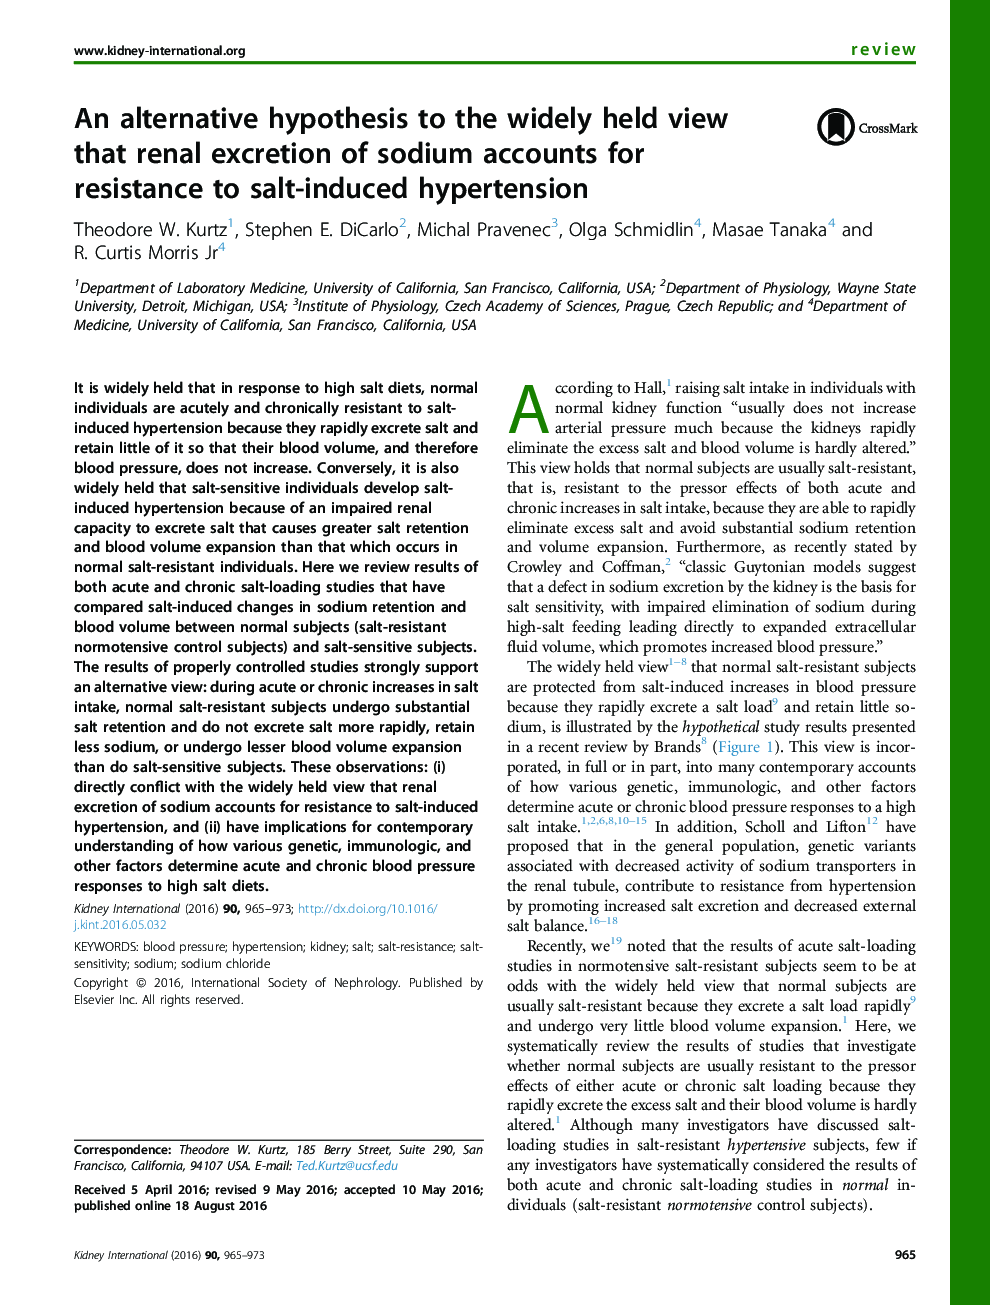 An alternative hypothesis to the widely held view that renal excretion of sodium accounts for resistance to salt-induced hypertension